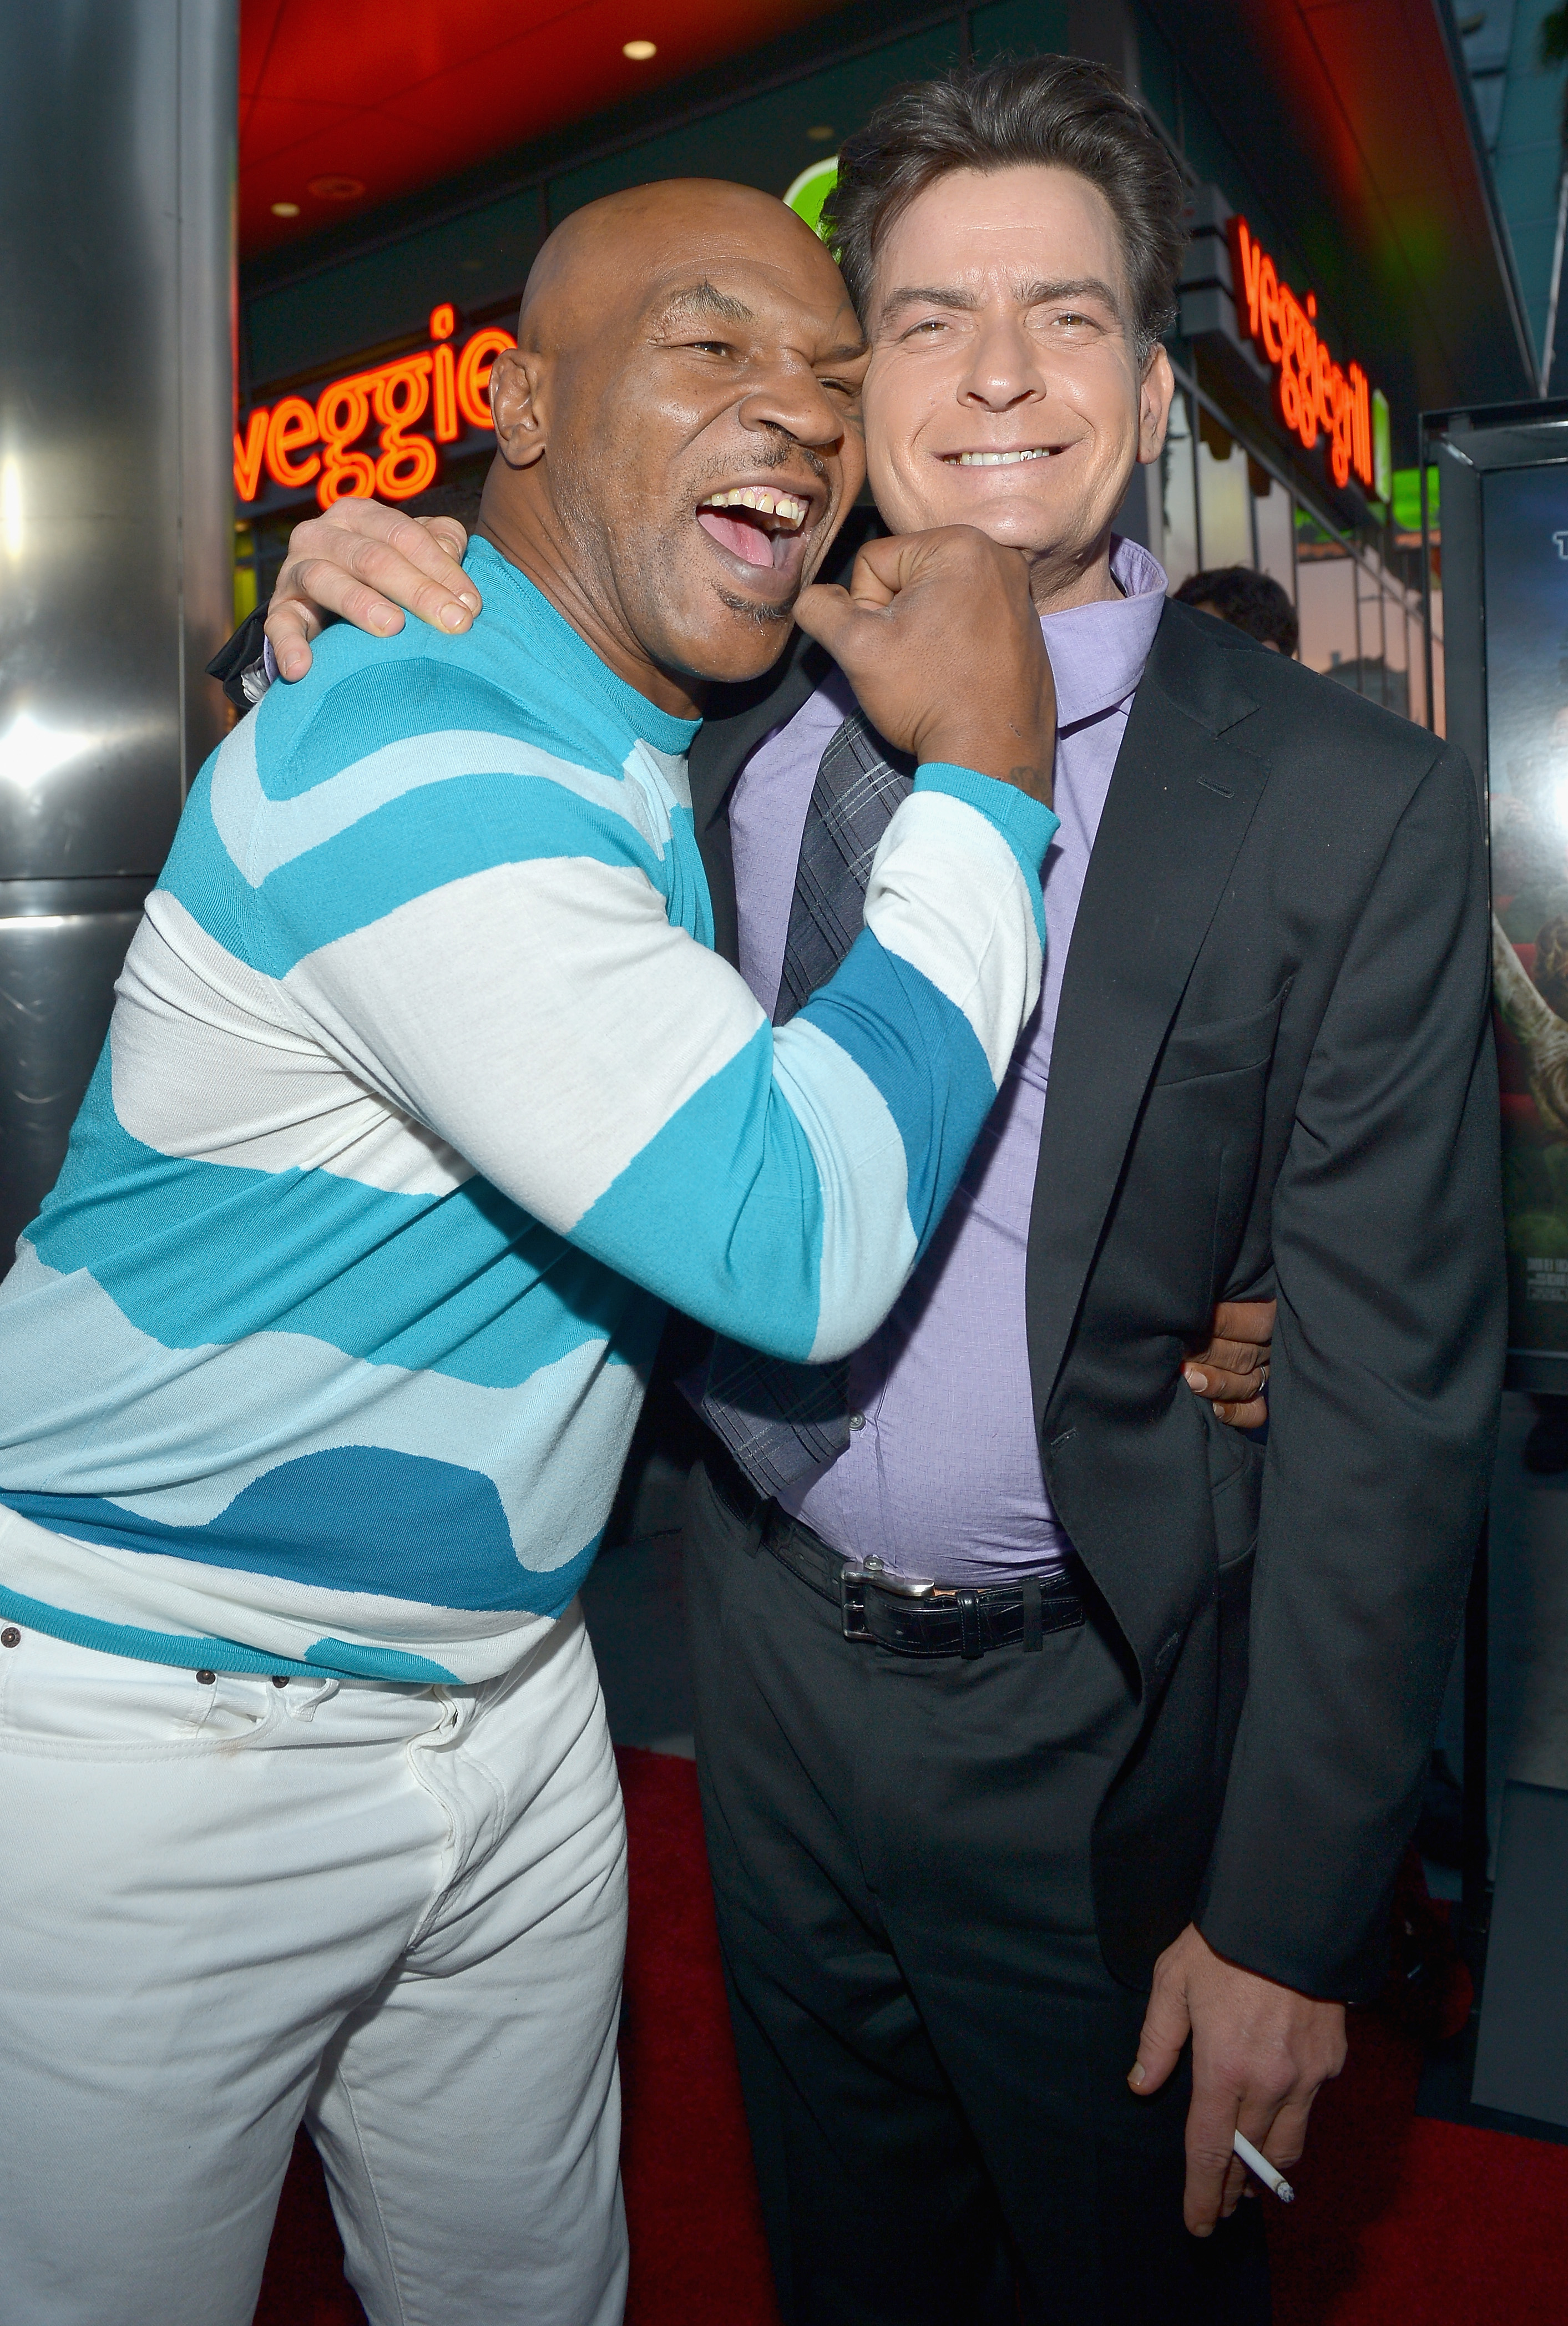 LOS ANGELES, CA - APRIL 11:  Actors Mike Tyson and Charlie Sheen arrive at the premiere of "Scary Movie V" presented by Dimension Films, in partnership with Lexus and Chambord at the Cinerama Dome on April 11, 2013 in Los Angeles, California.  (Photo by Charley Gallay/WireImage)